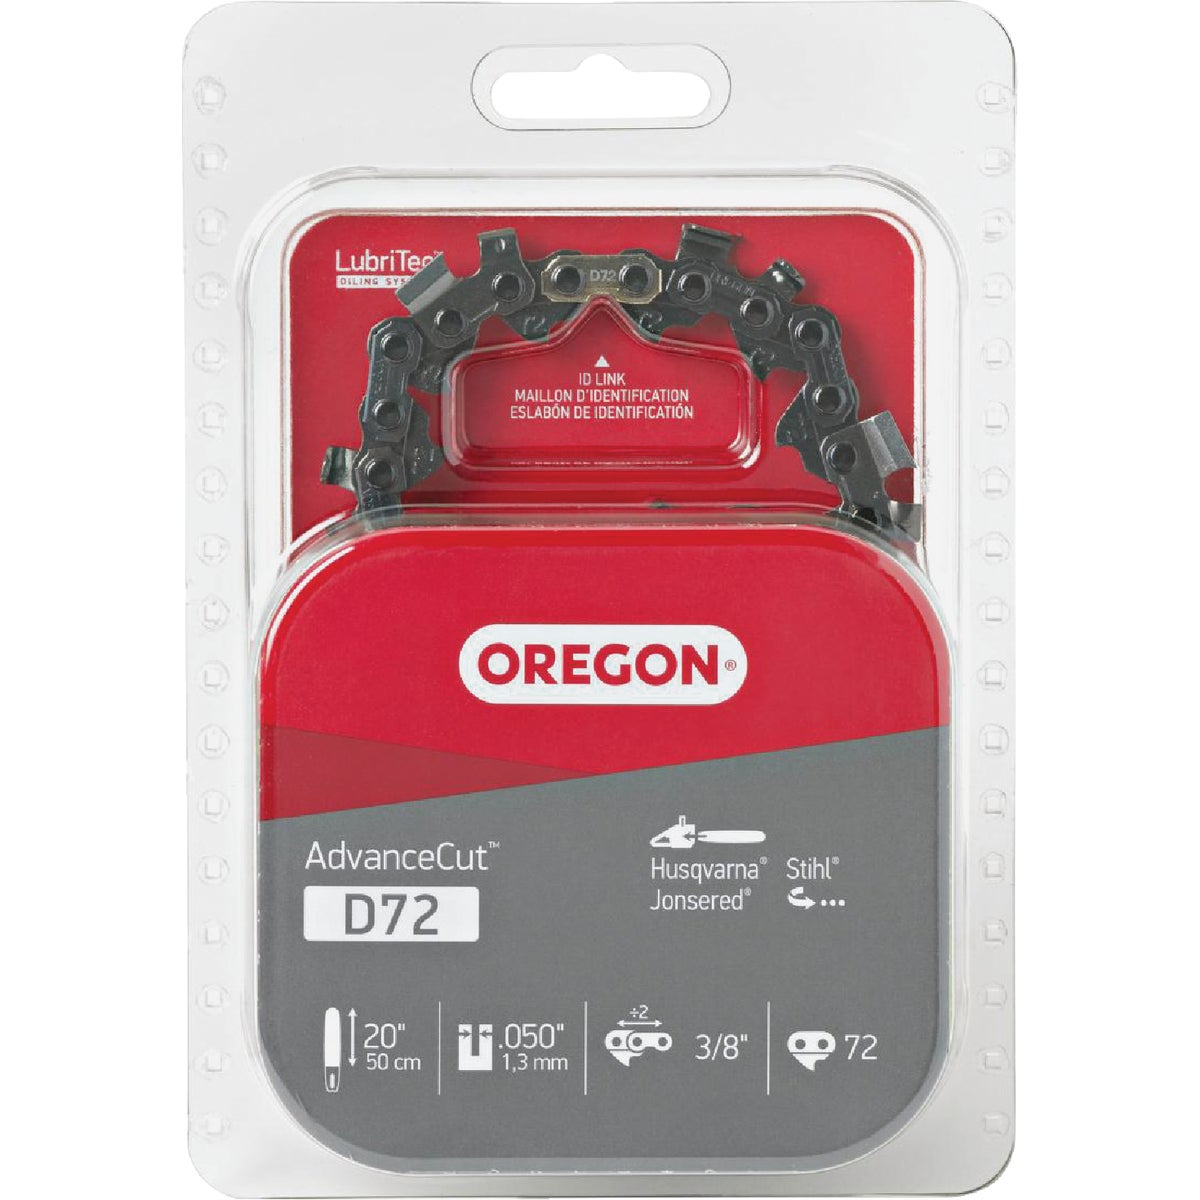 Oregon D72 Replacement Chainsaw Chain Loops-20/21" REPL SAW CHAIN